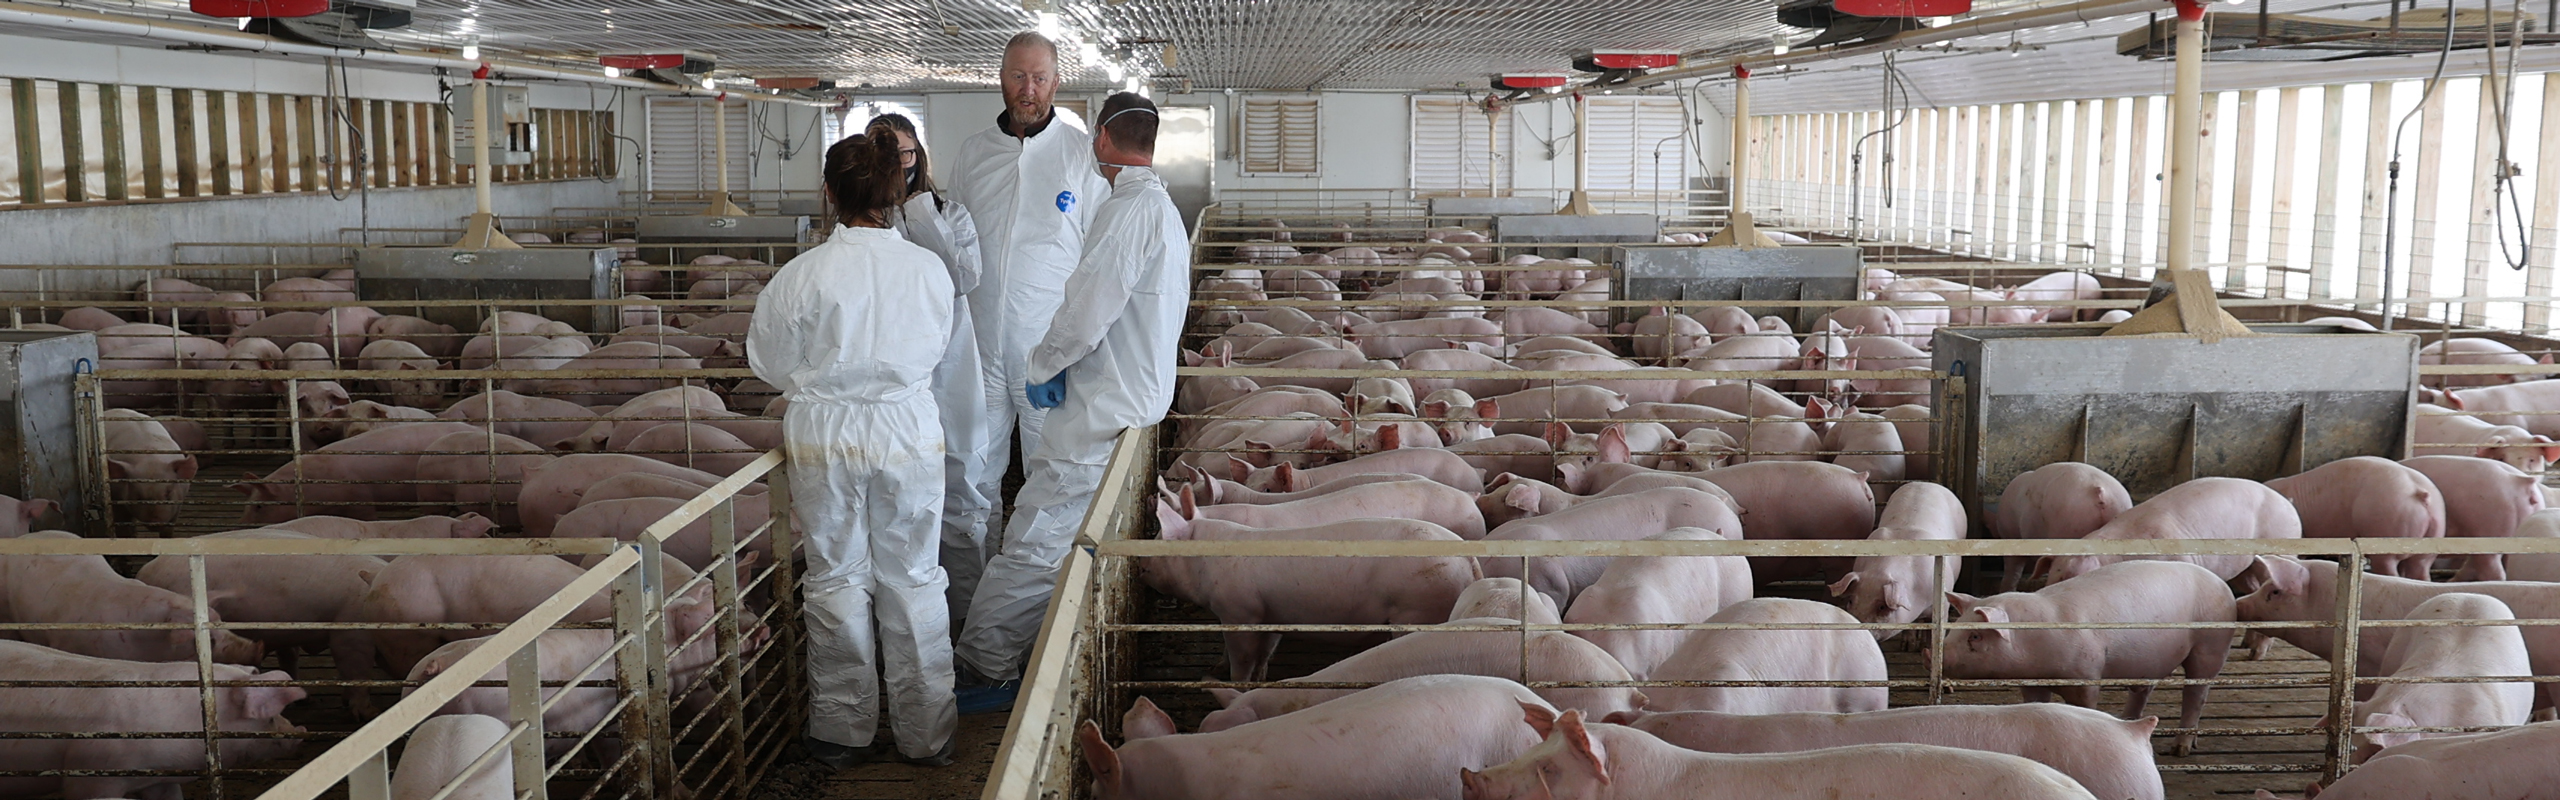 Dynamic Pig Health: unraveling patterns of swine pathogen co-infections ...